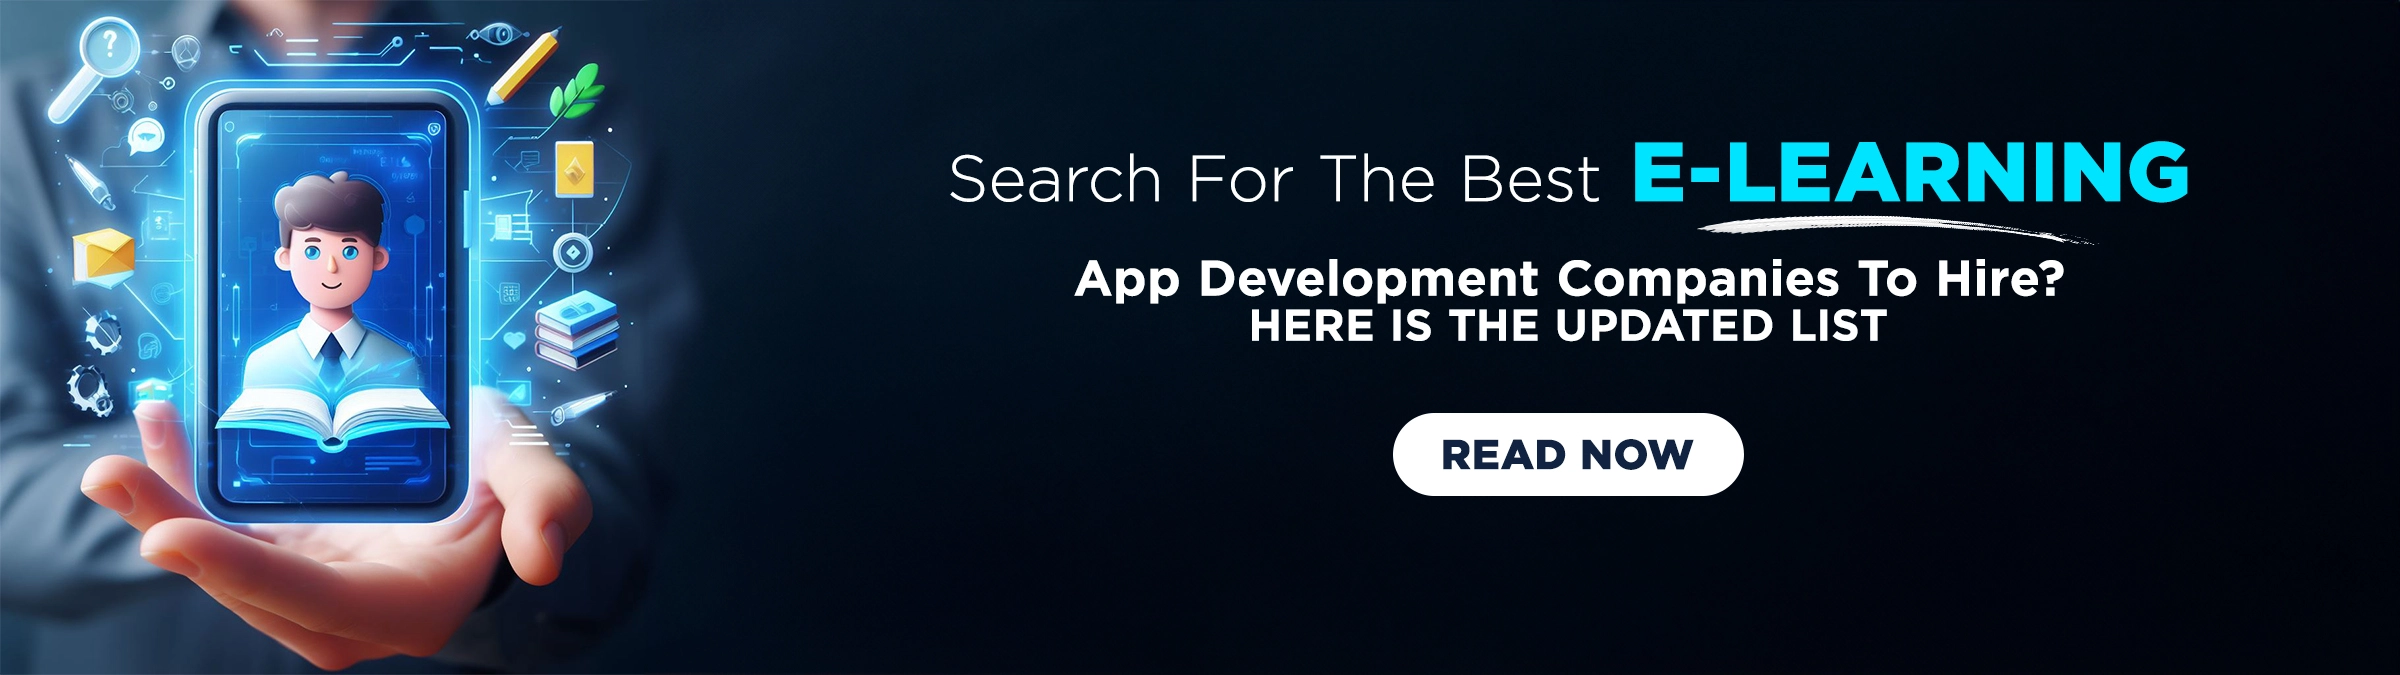 Search For The Best E-Learning App Development Companies To Hire